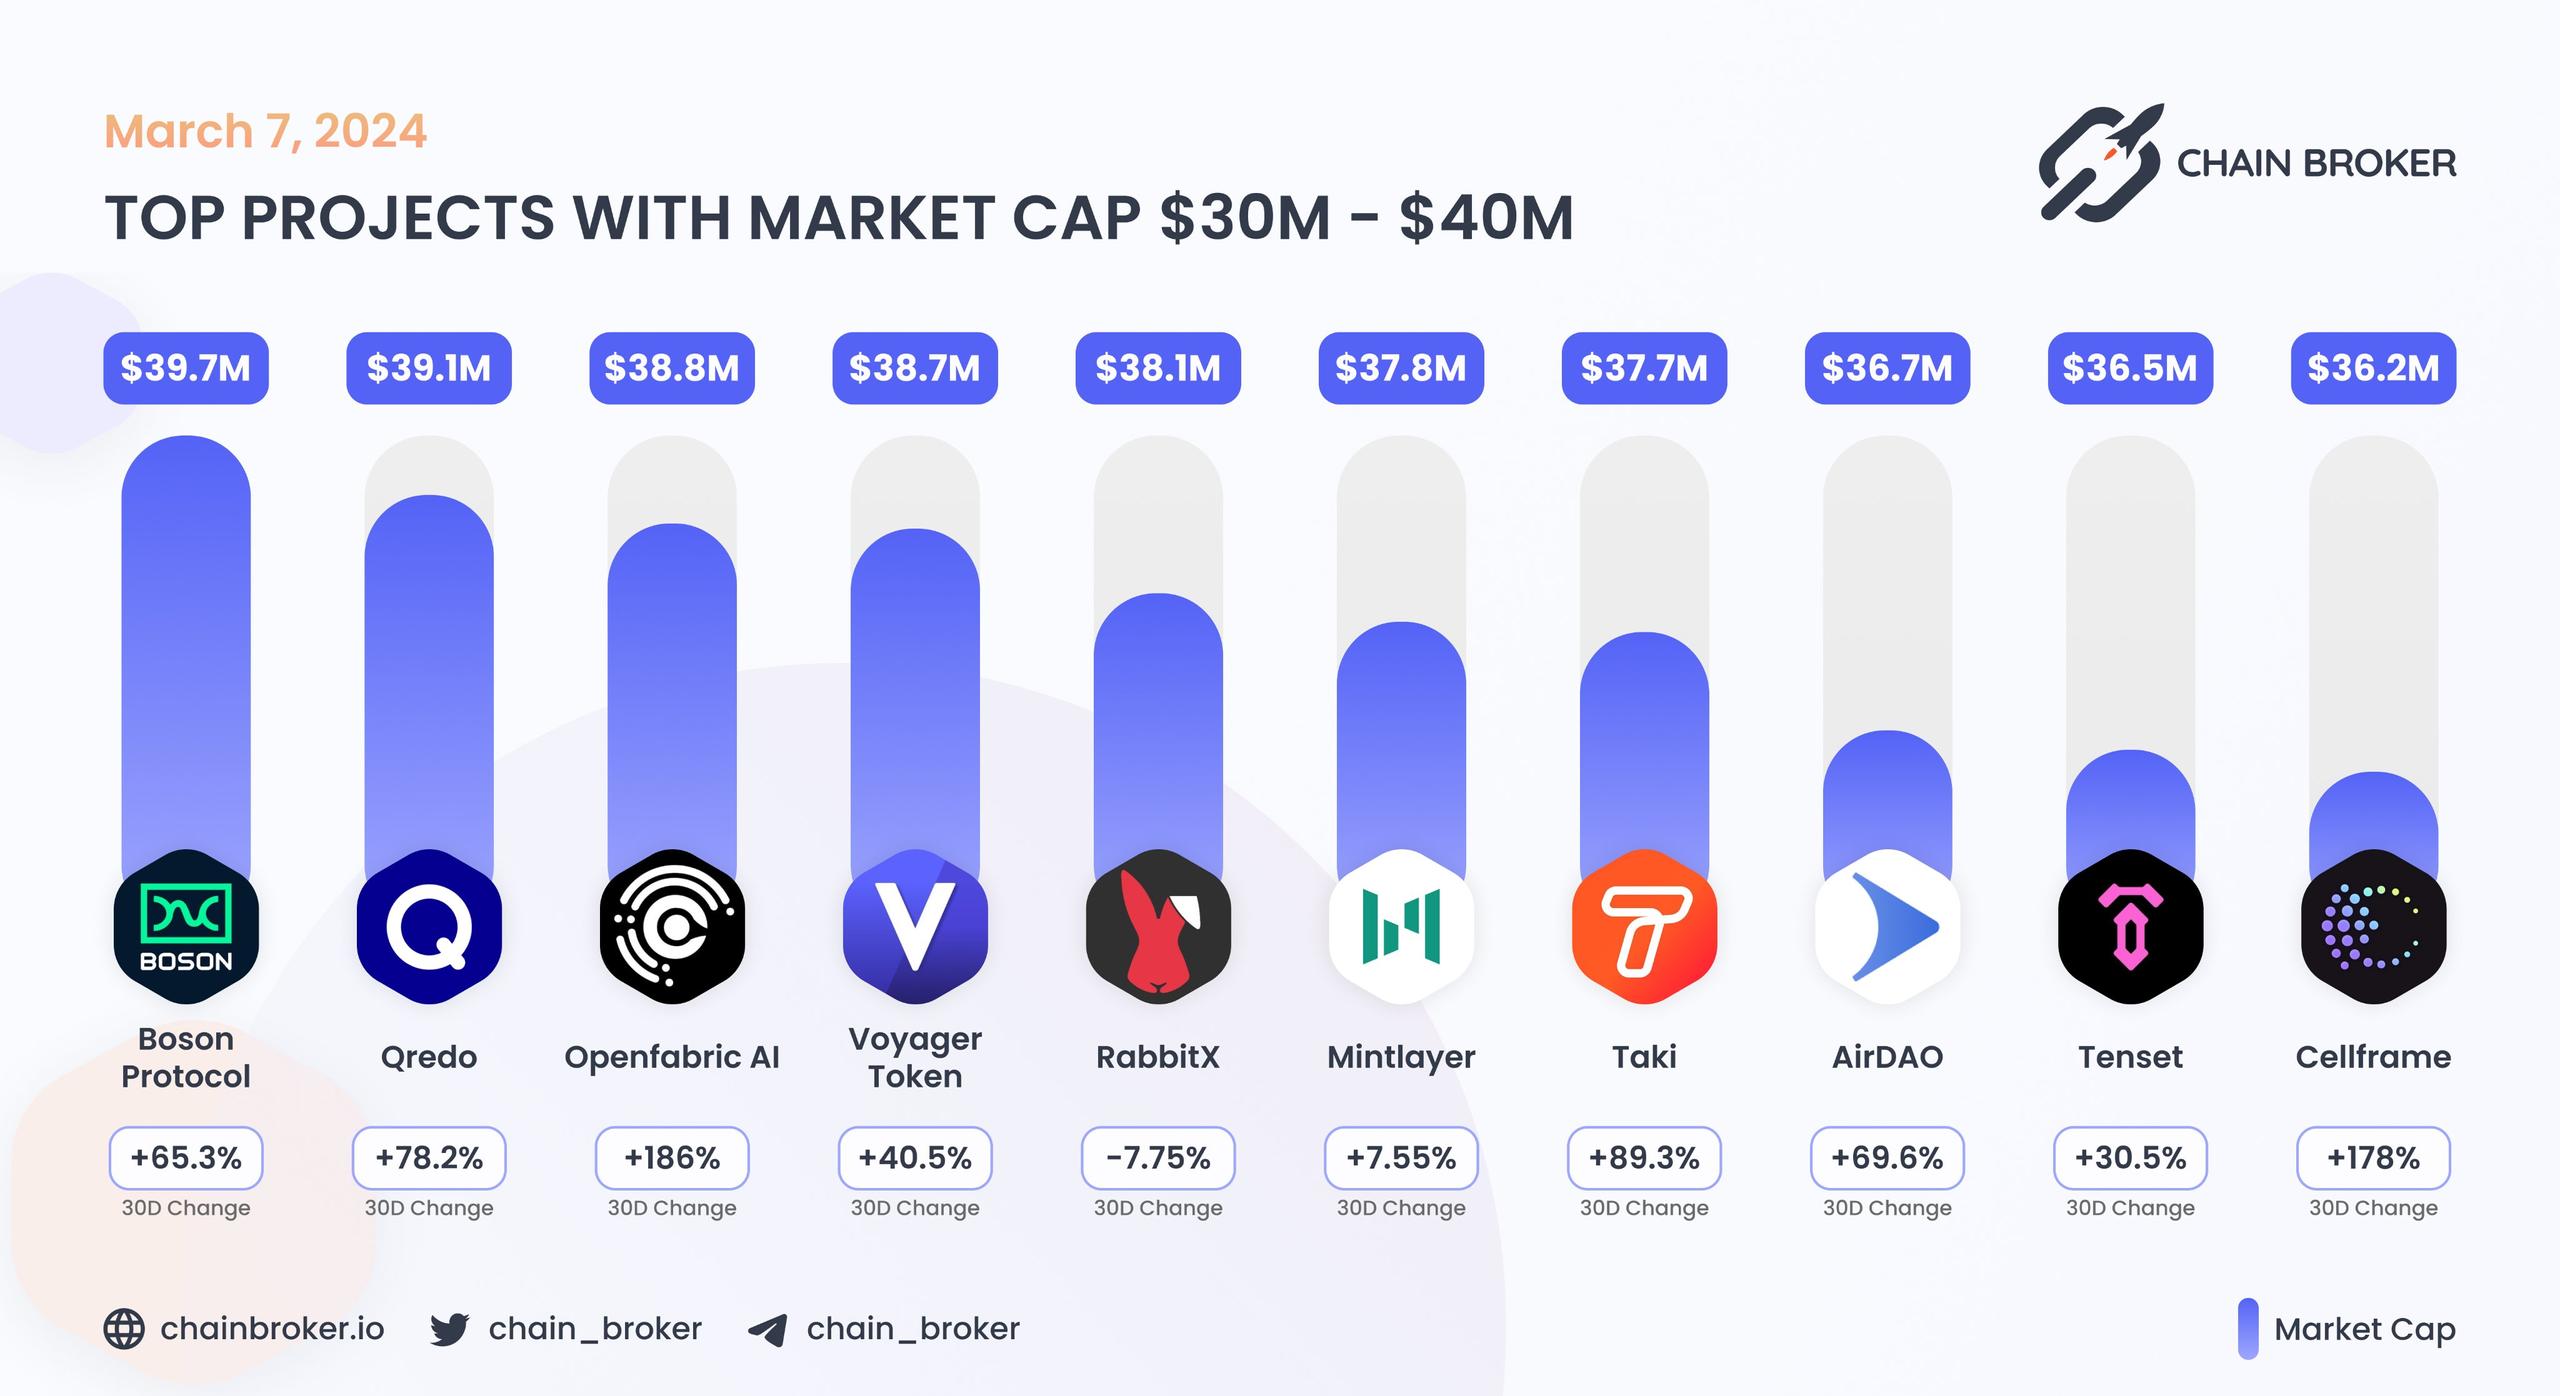 Top projects with Market Cap $30M - $40M